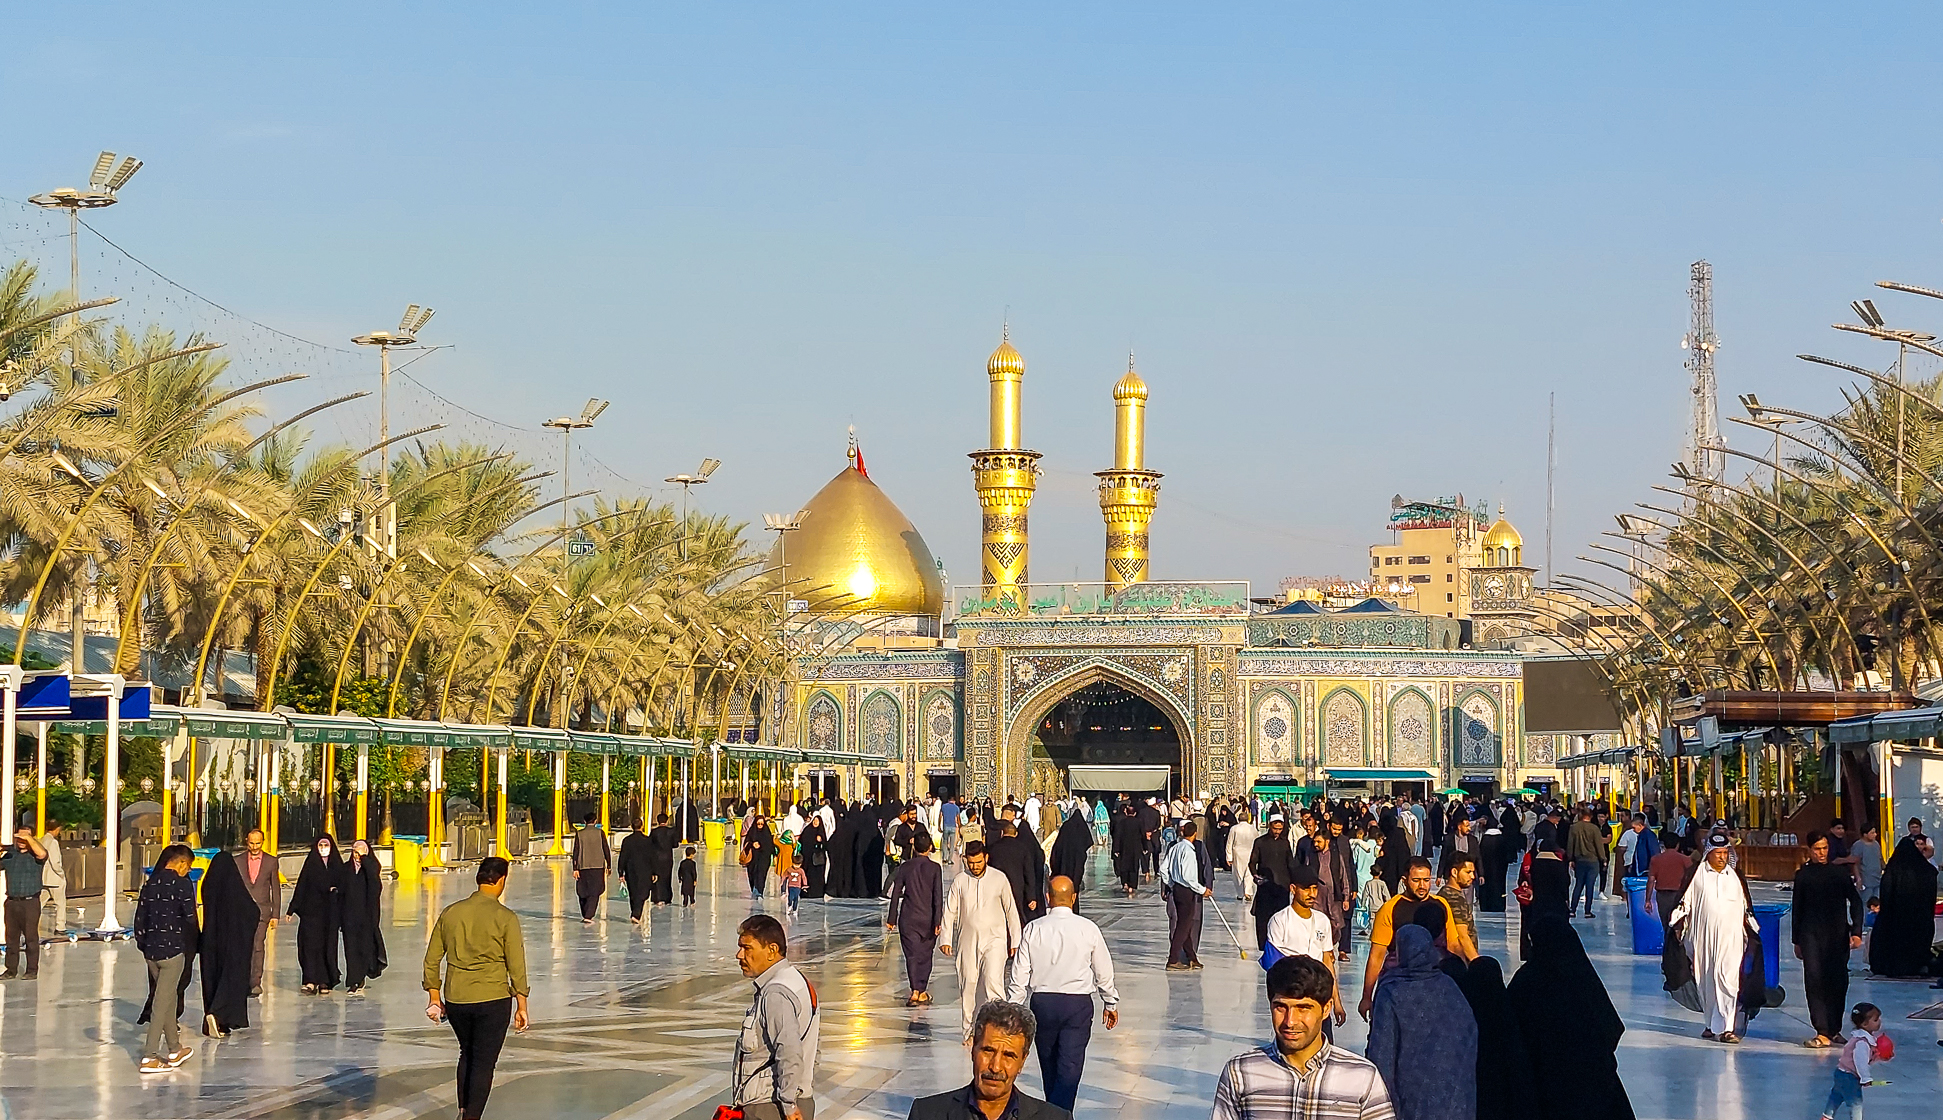 <span  class="uc_style_uc_tiles_grid_image_elementor_uc_items_attribute_title" style="color:#ffffff;">Essential place to go for Iraqis: City of Karbala (holy shrine of Imam Hossain)</span>